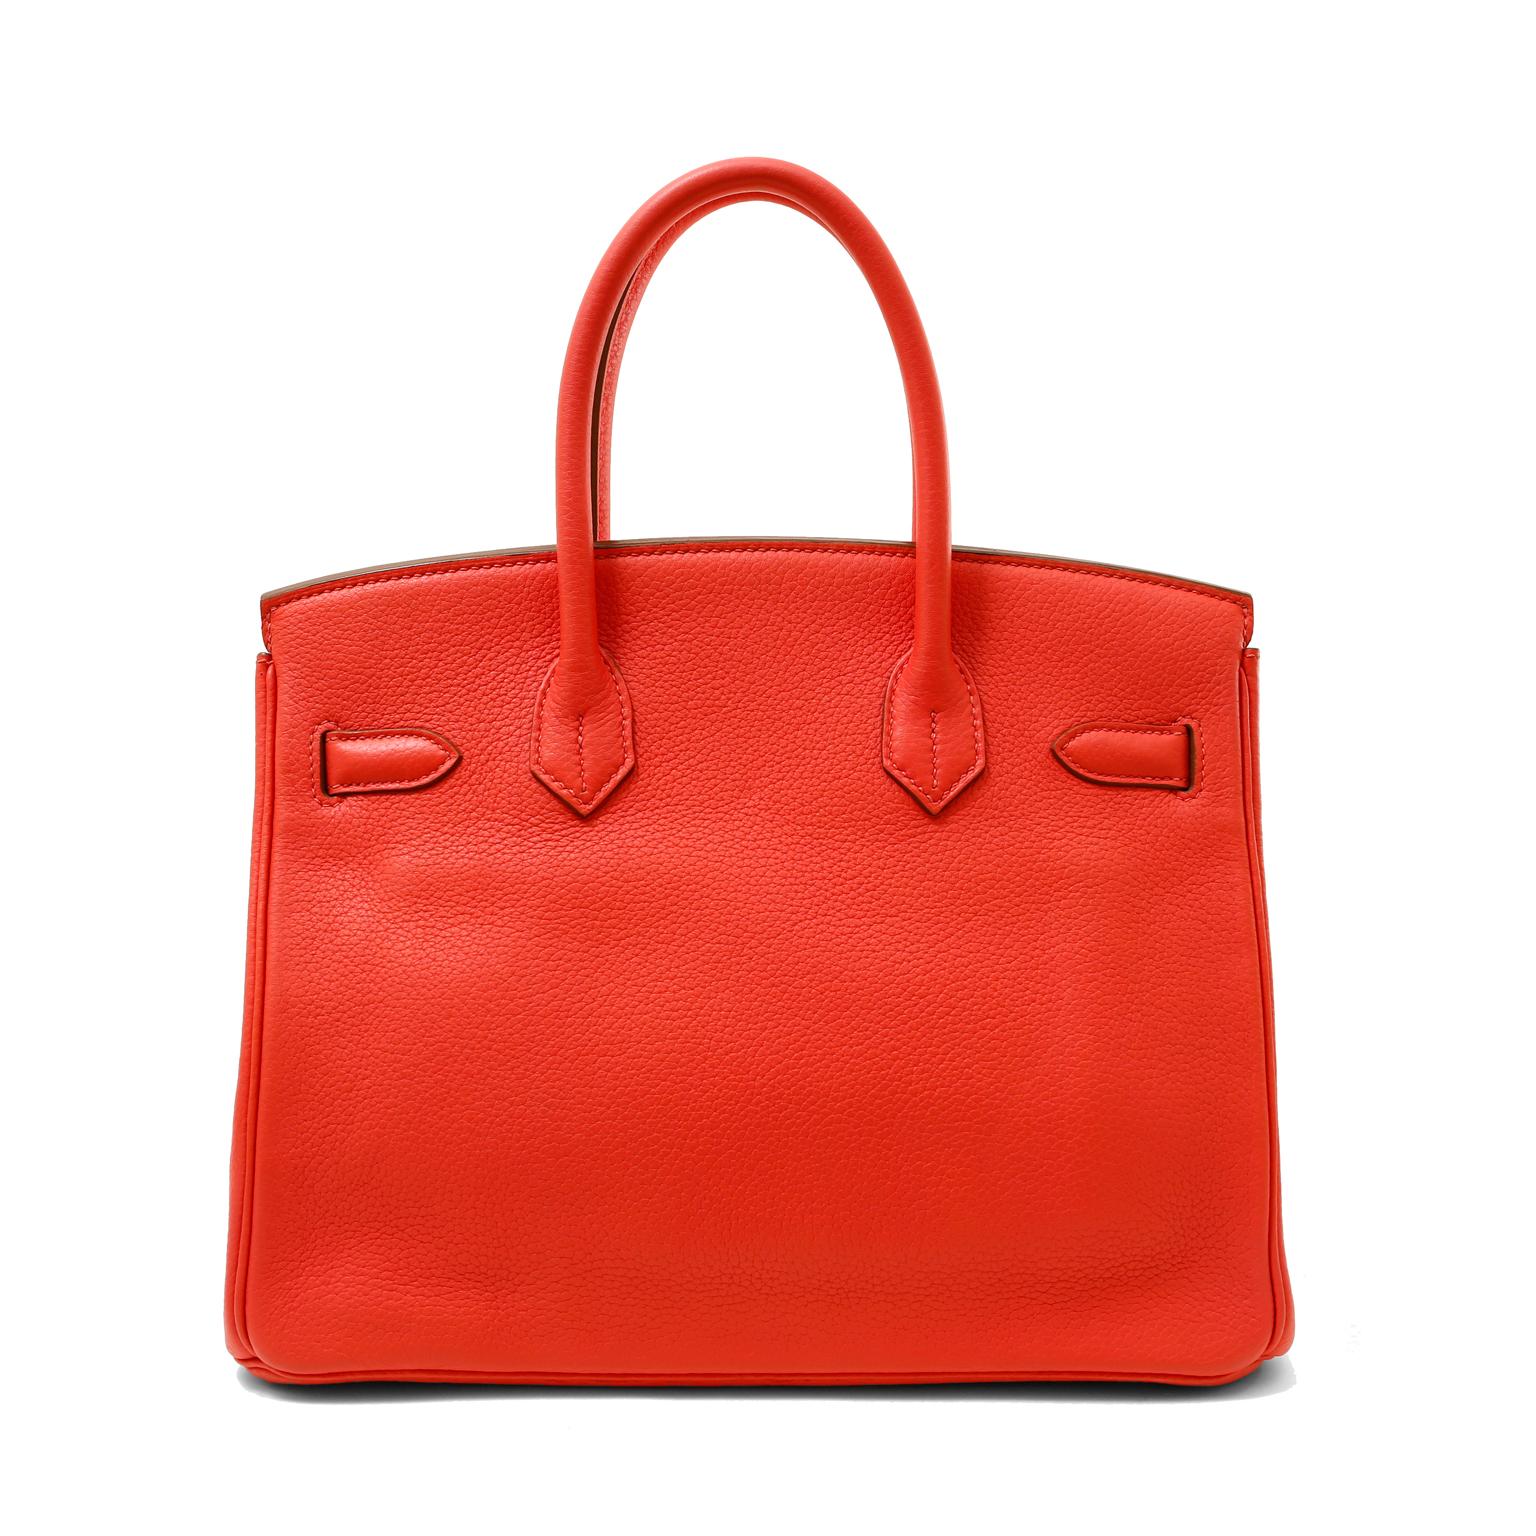 This authentic Hermès Poppy Red Togo 30 cm Birkin is in pristine unworn condition with the protective plastic intact on the hardware.  Beautifully warmed by gold hardware, the combination is captivating.
Textured and durable bright Poppy Togo